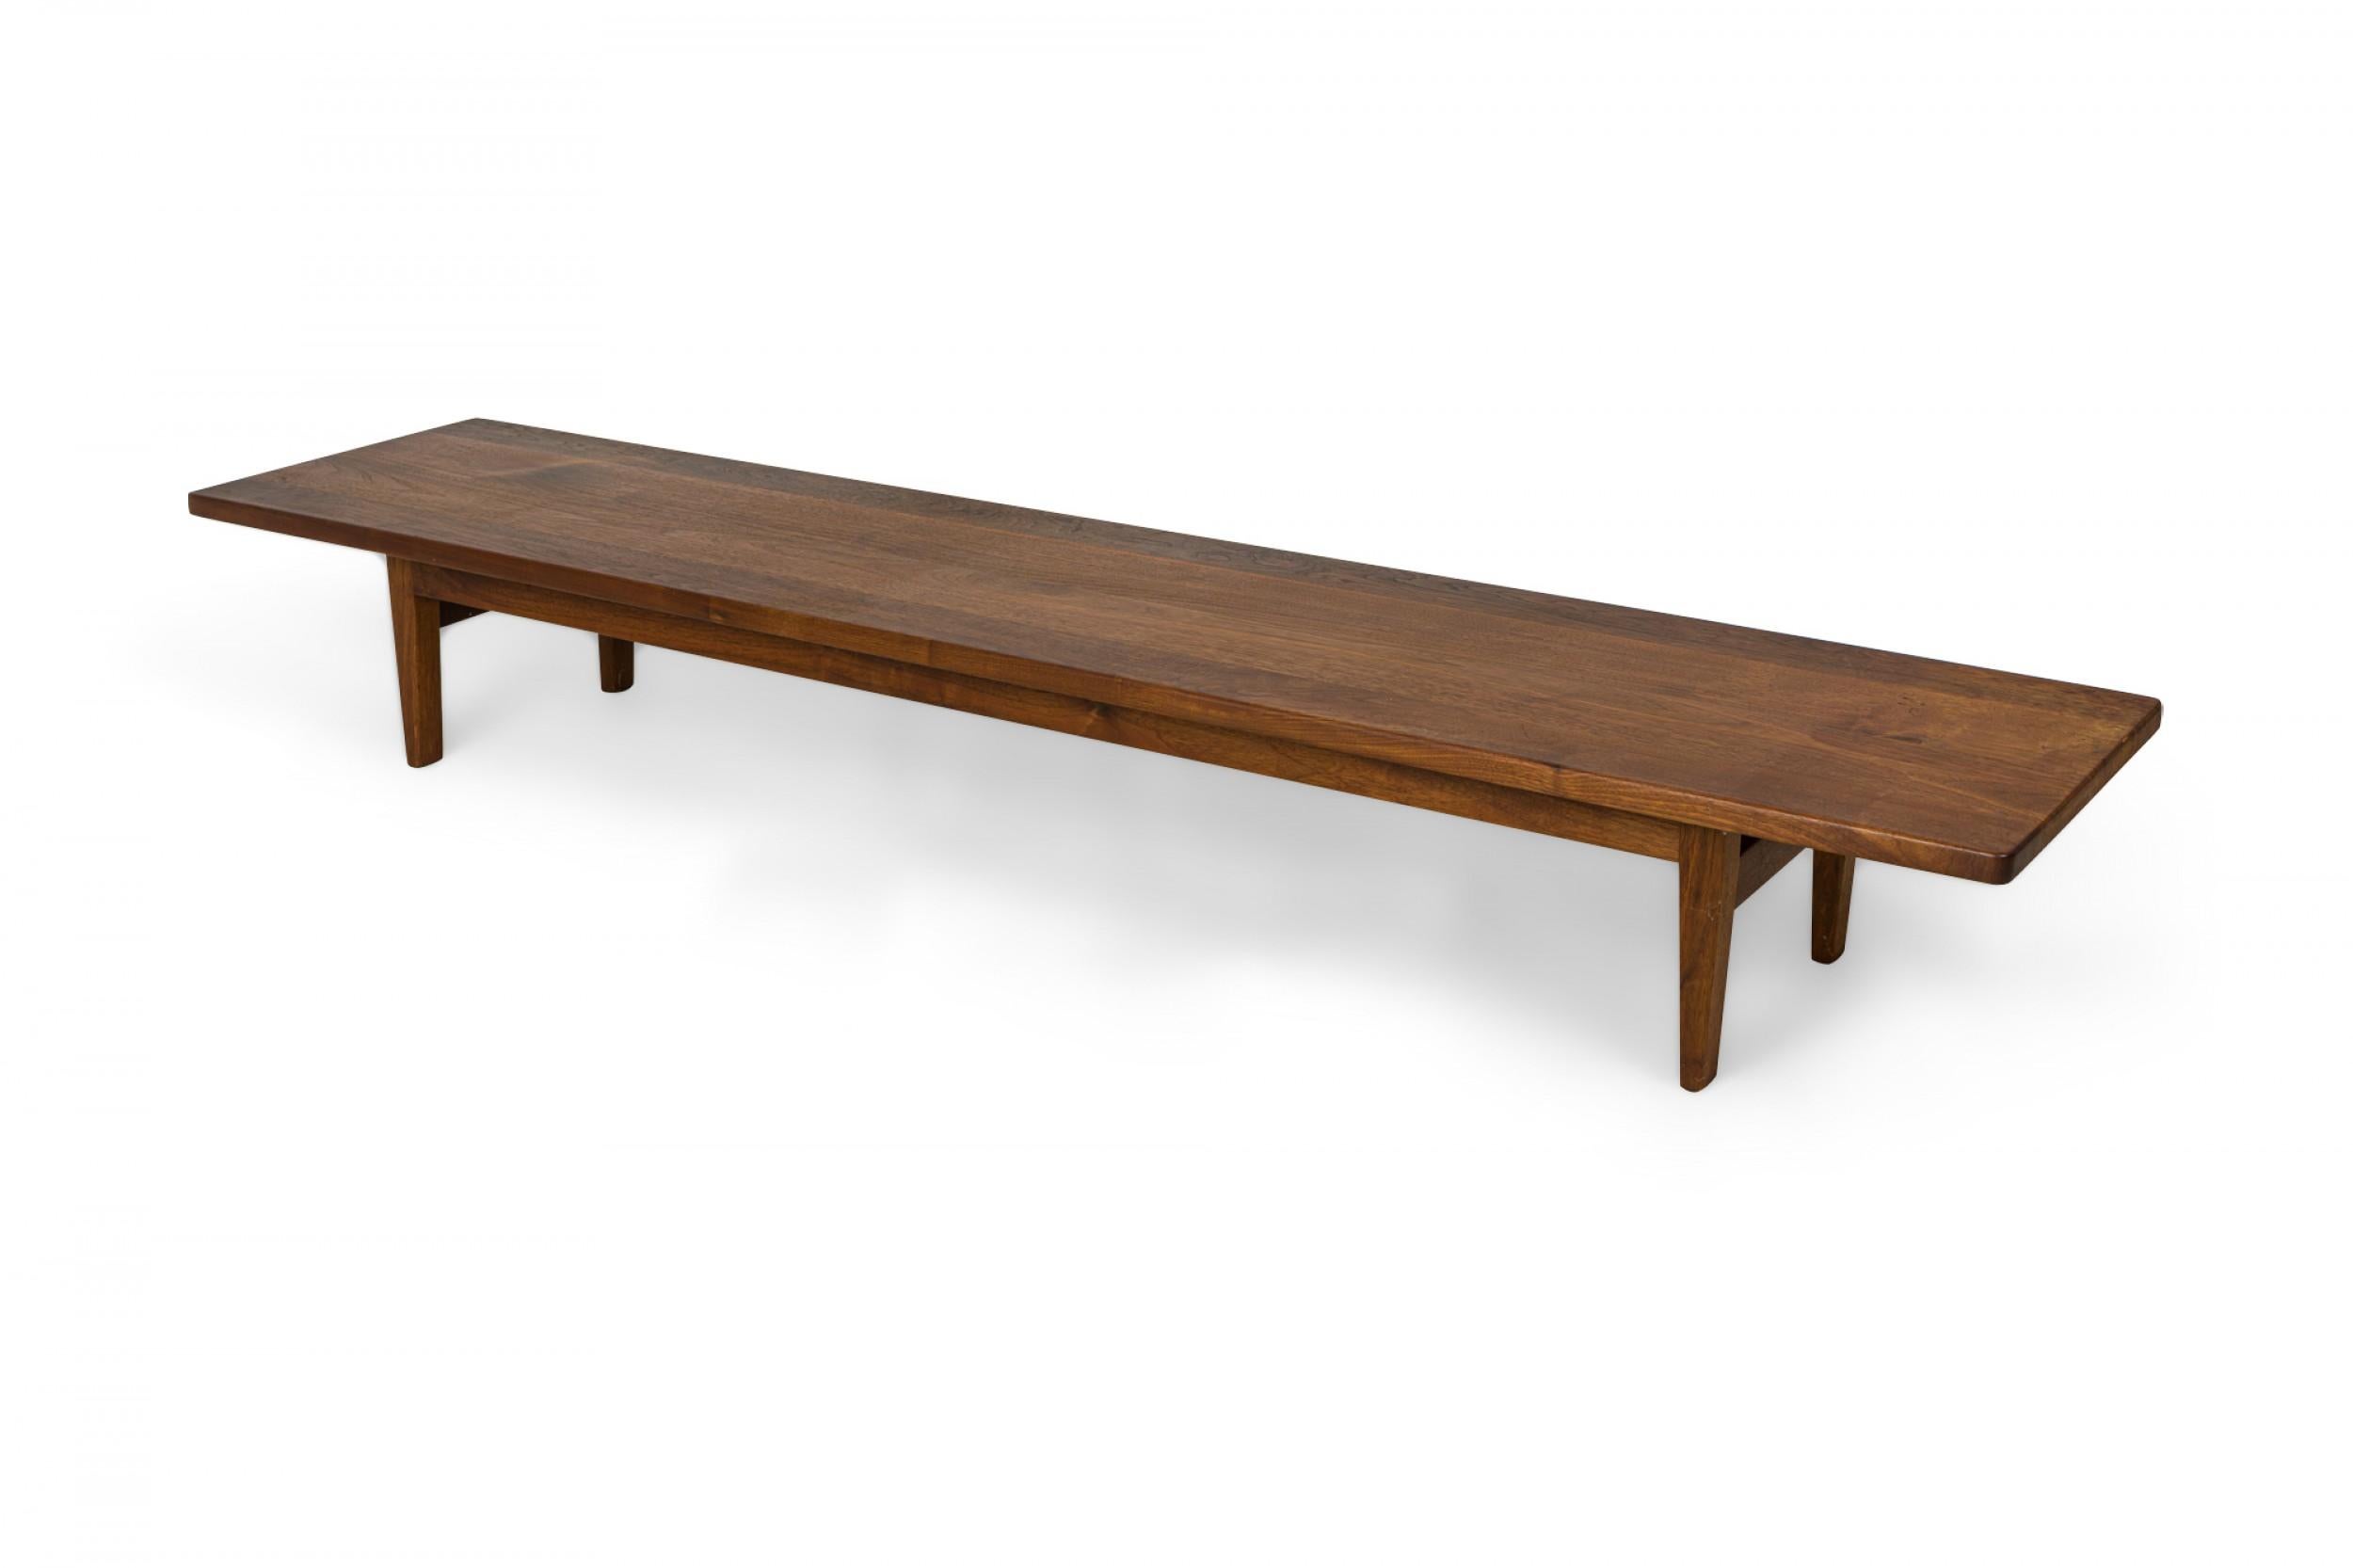 American mid-century low table with an elongated rectangular plank surface resting on four slightly tapered squared legs. (ARDEN RIDDLE)